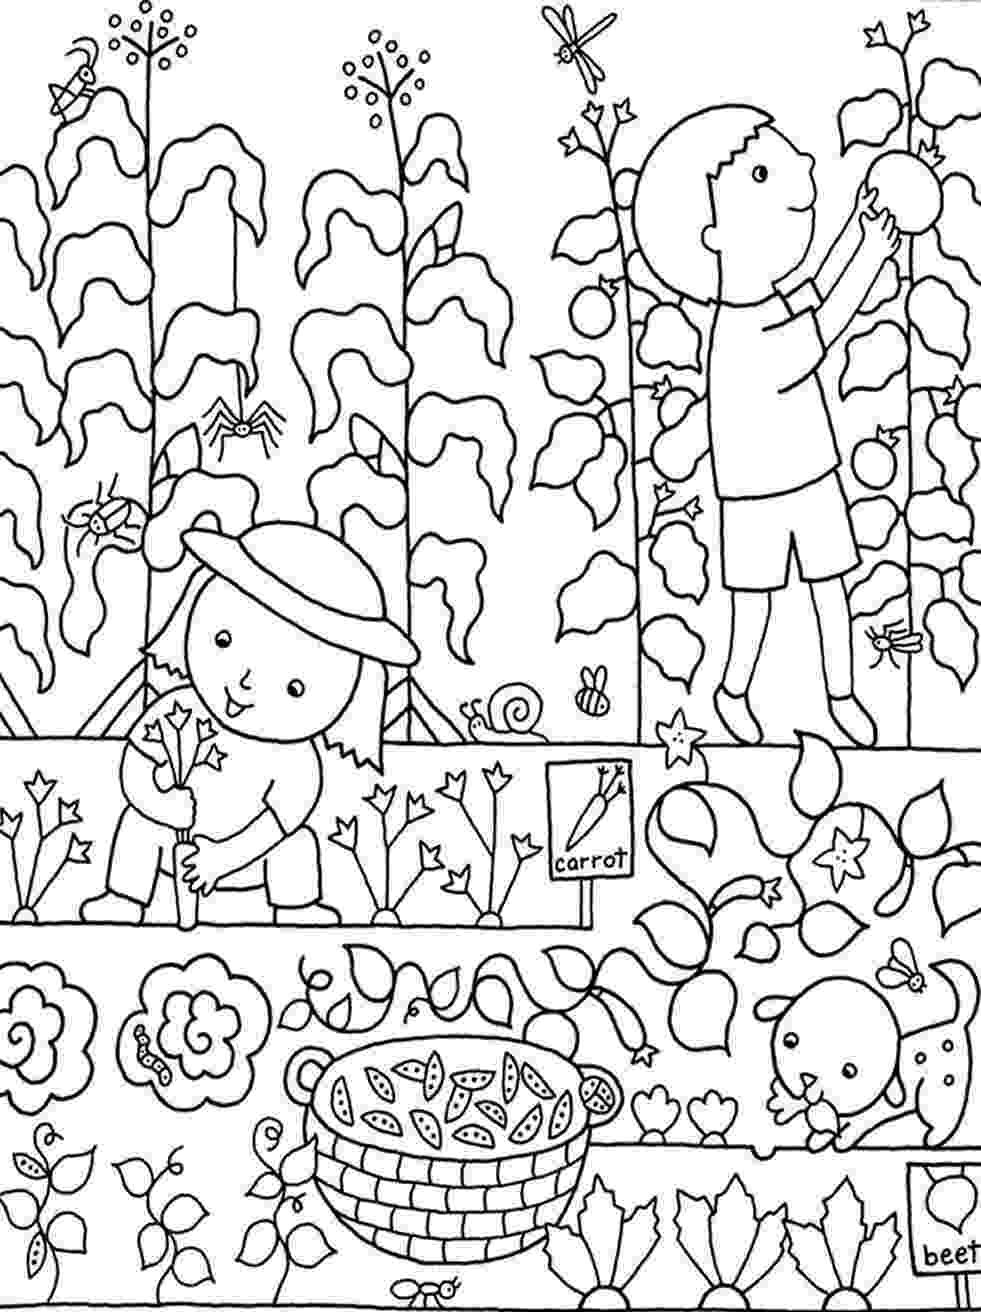 garden coloring inkspired musings it39s hard to be green garden coloring 